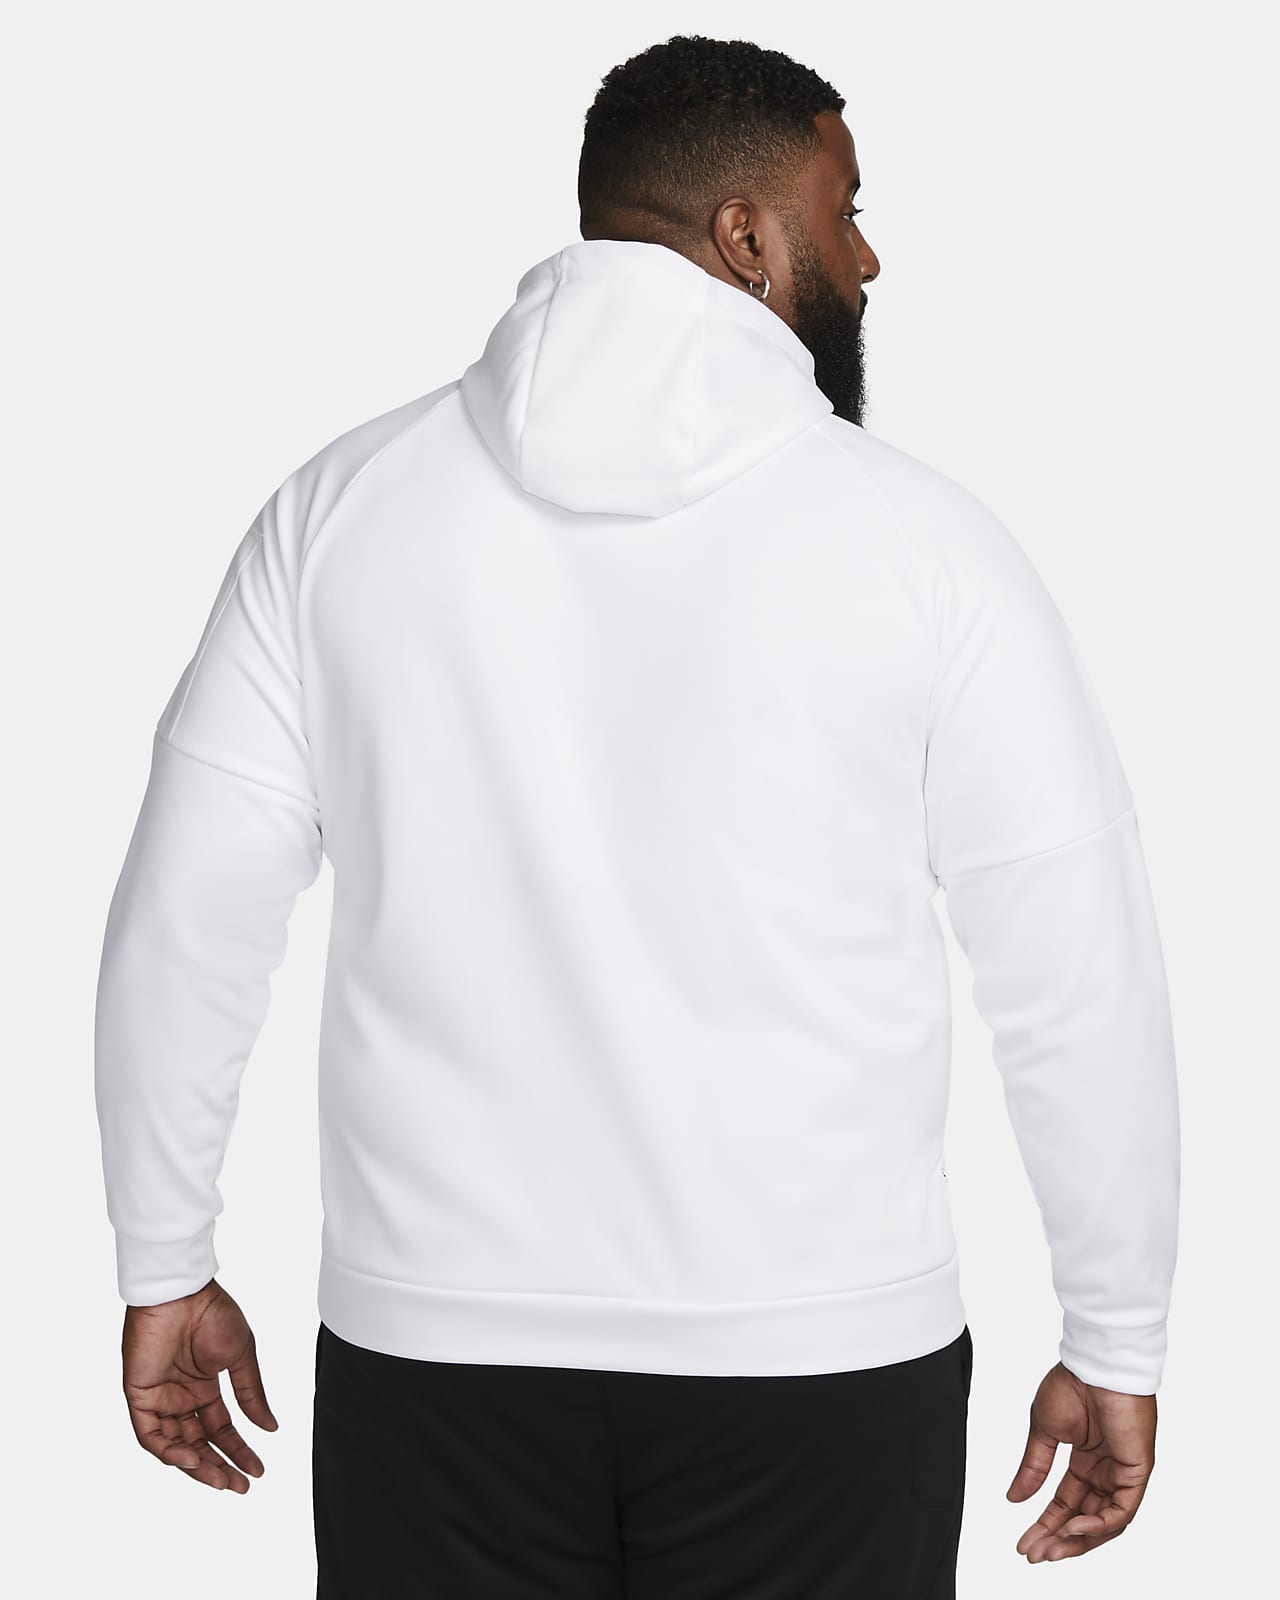 Men's Therma-FIT Hooded Fitness Nike.com